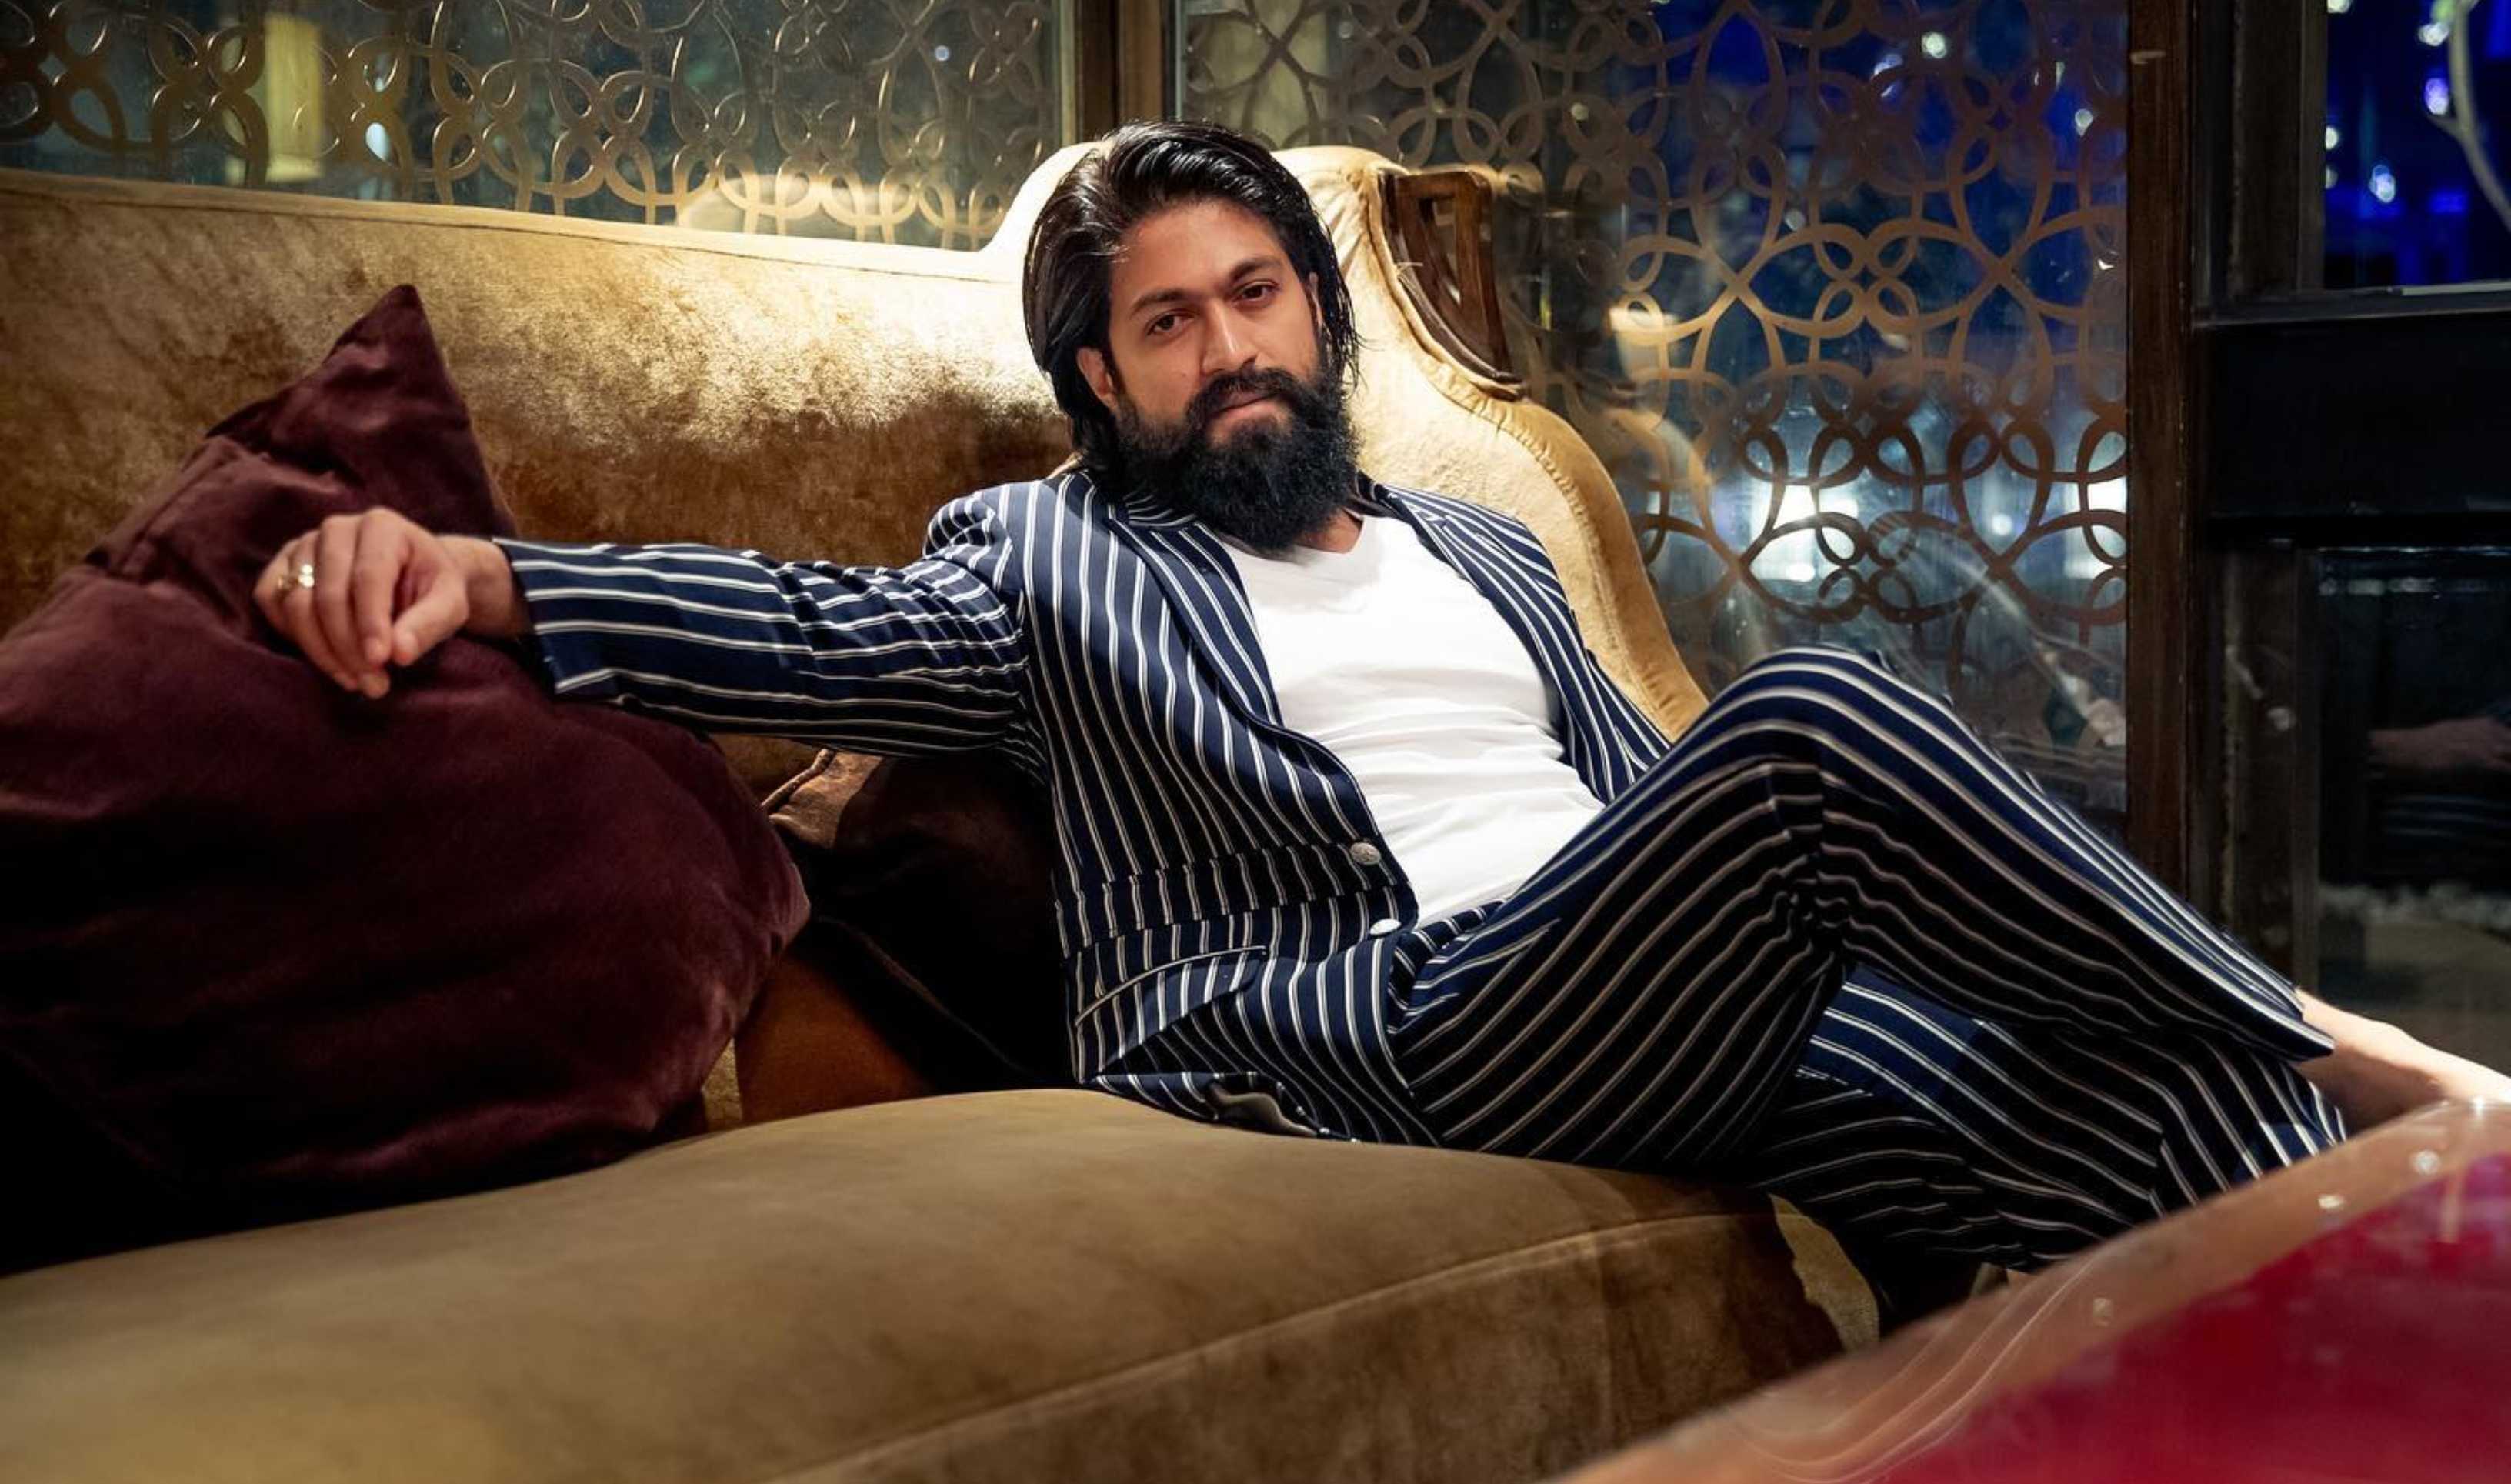 KGF Chapter 2 star Yash remembers life as a student: ‘I was irresponsible and loafed about in the streets’